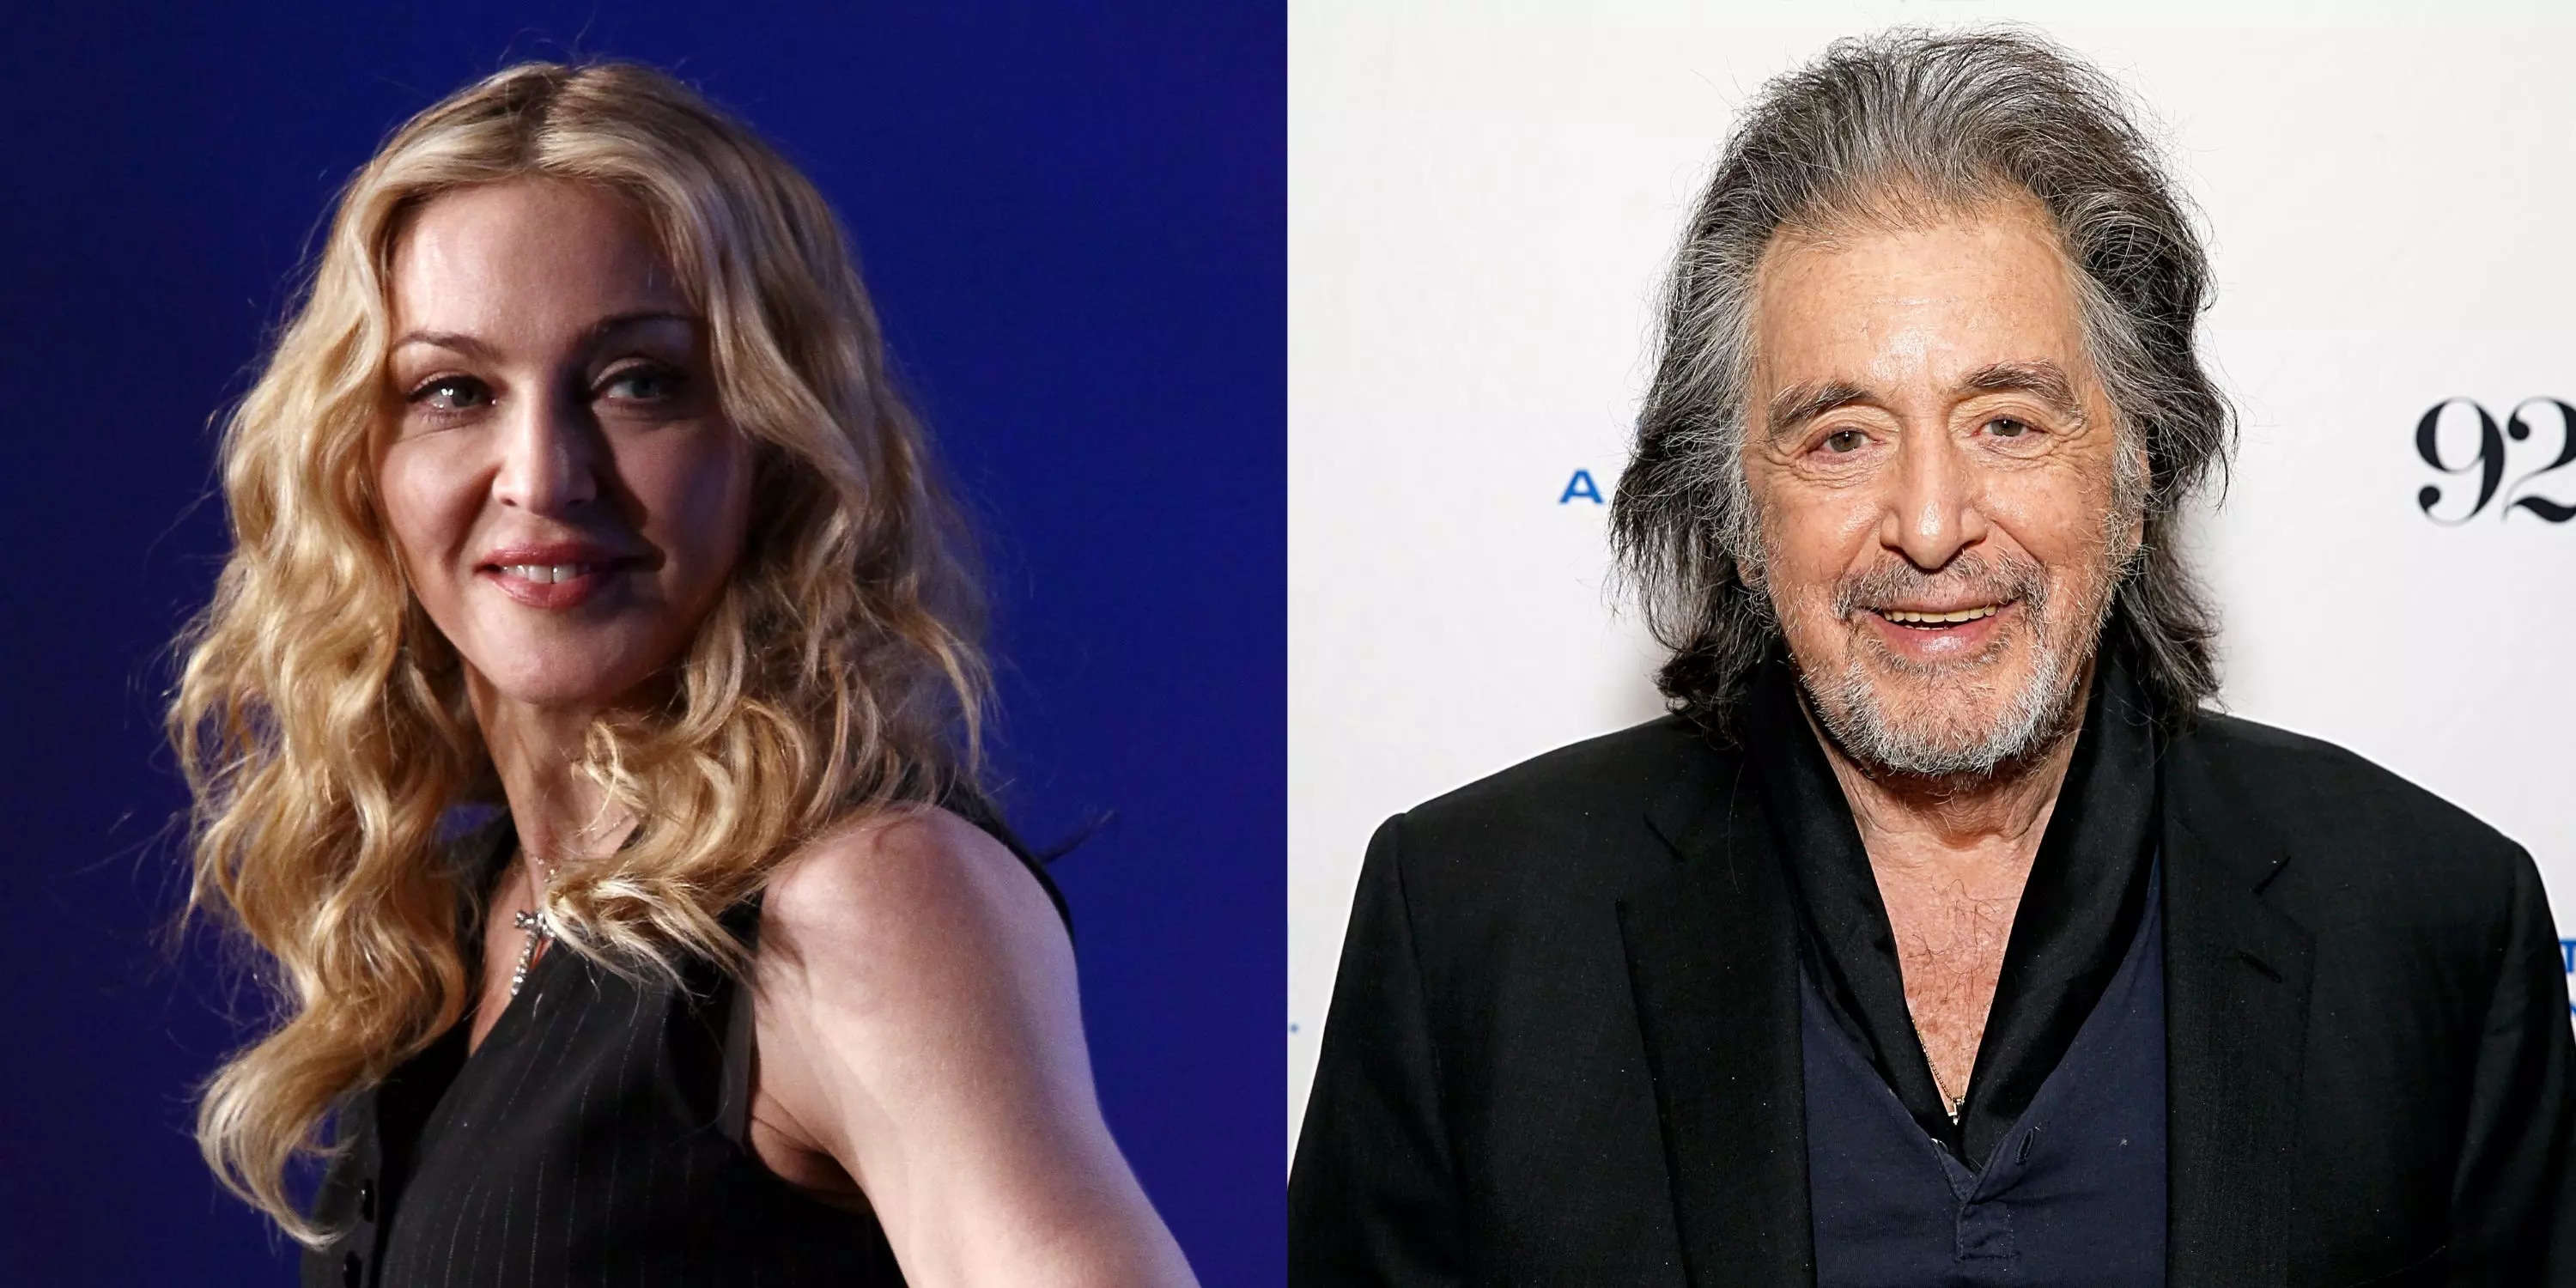 Madonna stuck her tongue in Al Pacino's ear when they first met, says singer's former roommate | Business Insider India